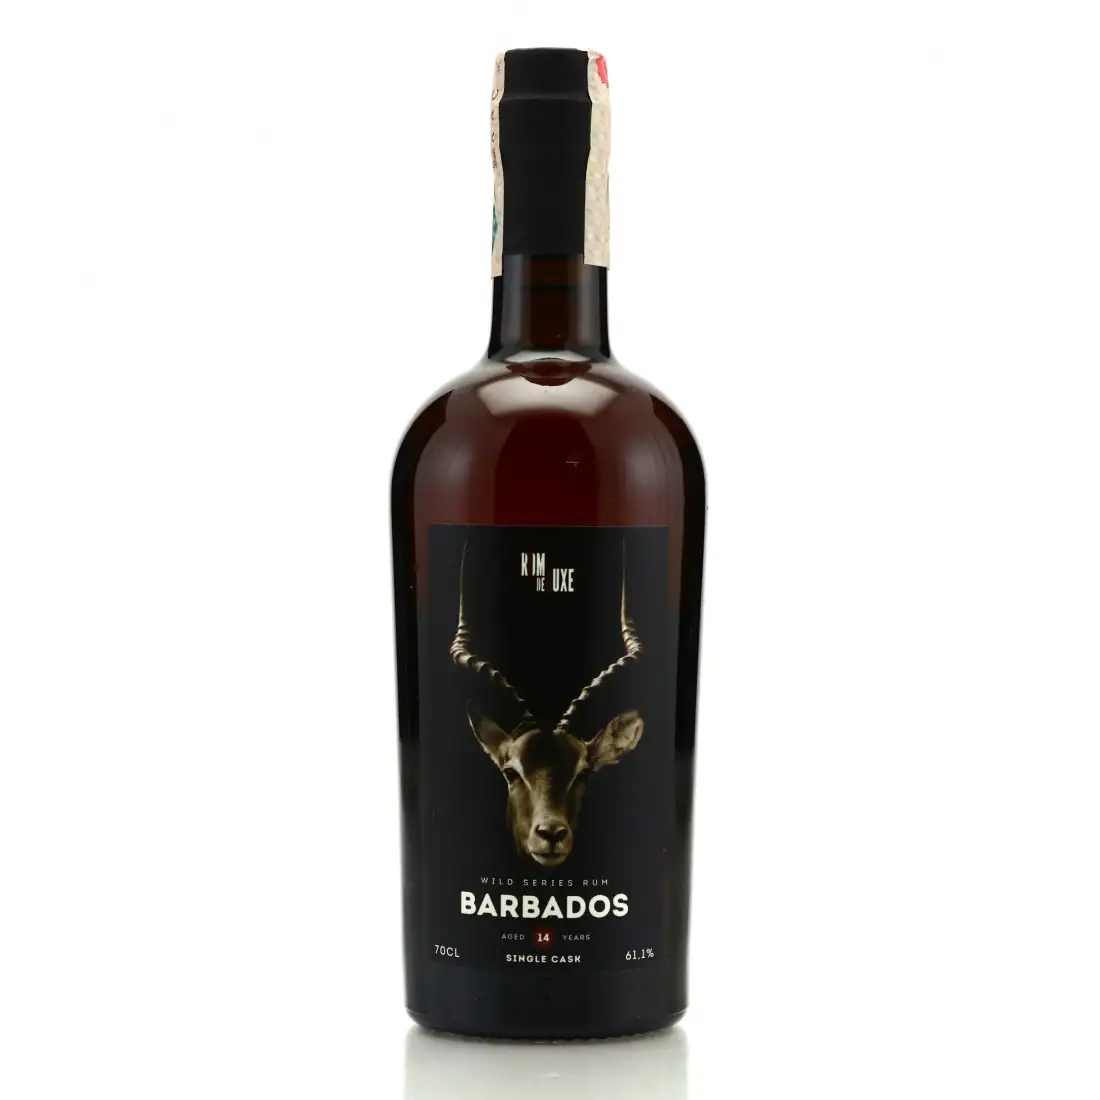 Image of the front of the bottle of the rum Wild Series Rum Barbados No. 25 (Batch 2)